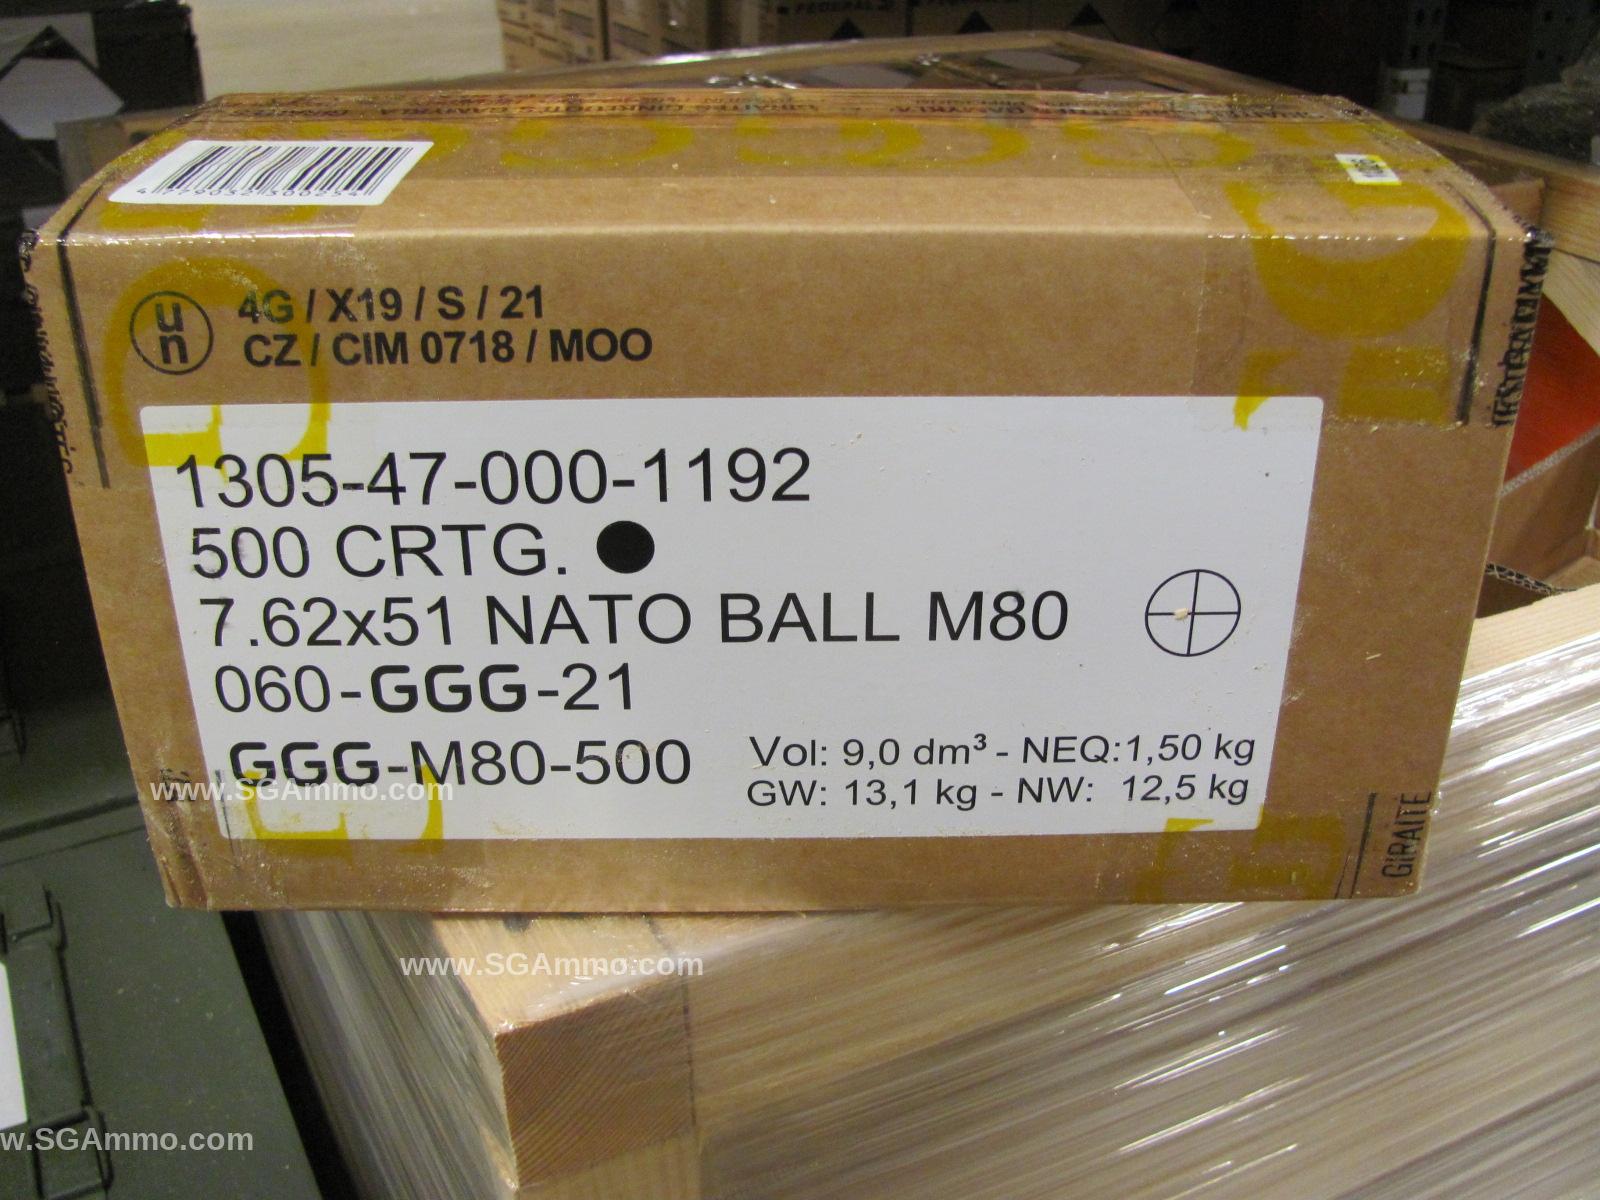 20 Round Box - 7.62x51 NATO Spec 147 Grain FMJ Ball Ammo - New Production Ammunition made by GGG in Lithuania